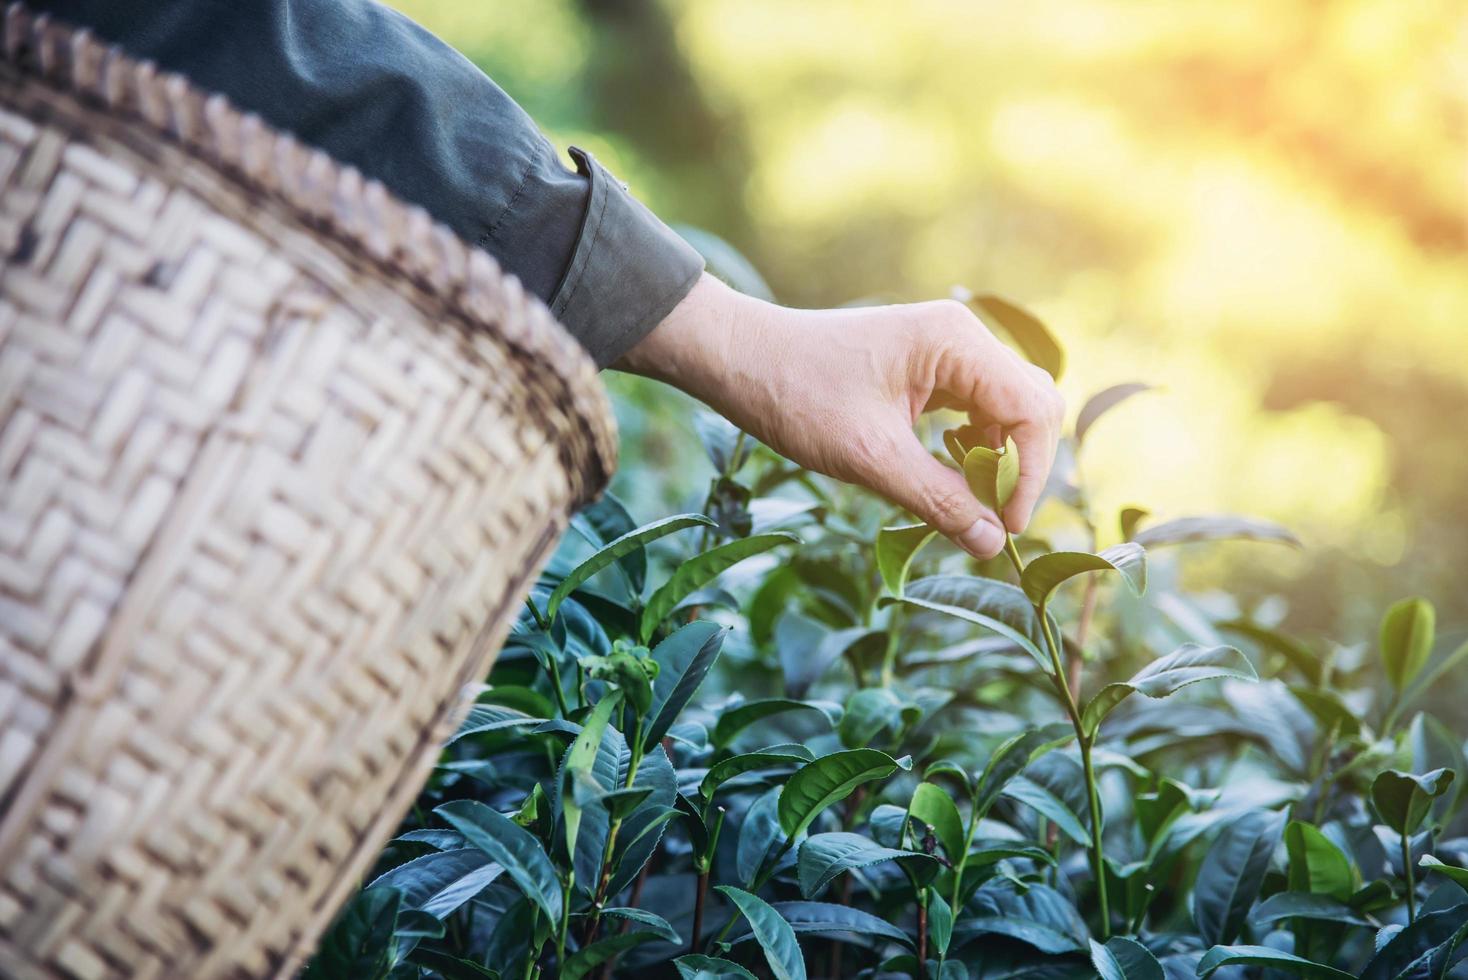 Man harvest pick fresh green tea leaves at high land tea field in Chiang Mai Thailand - local people with agriculture in high land nature concept photo